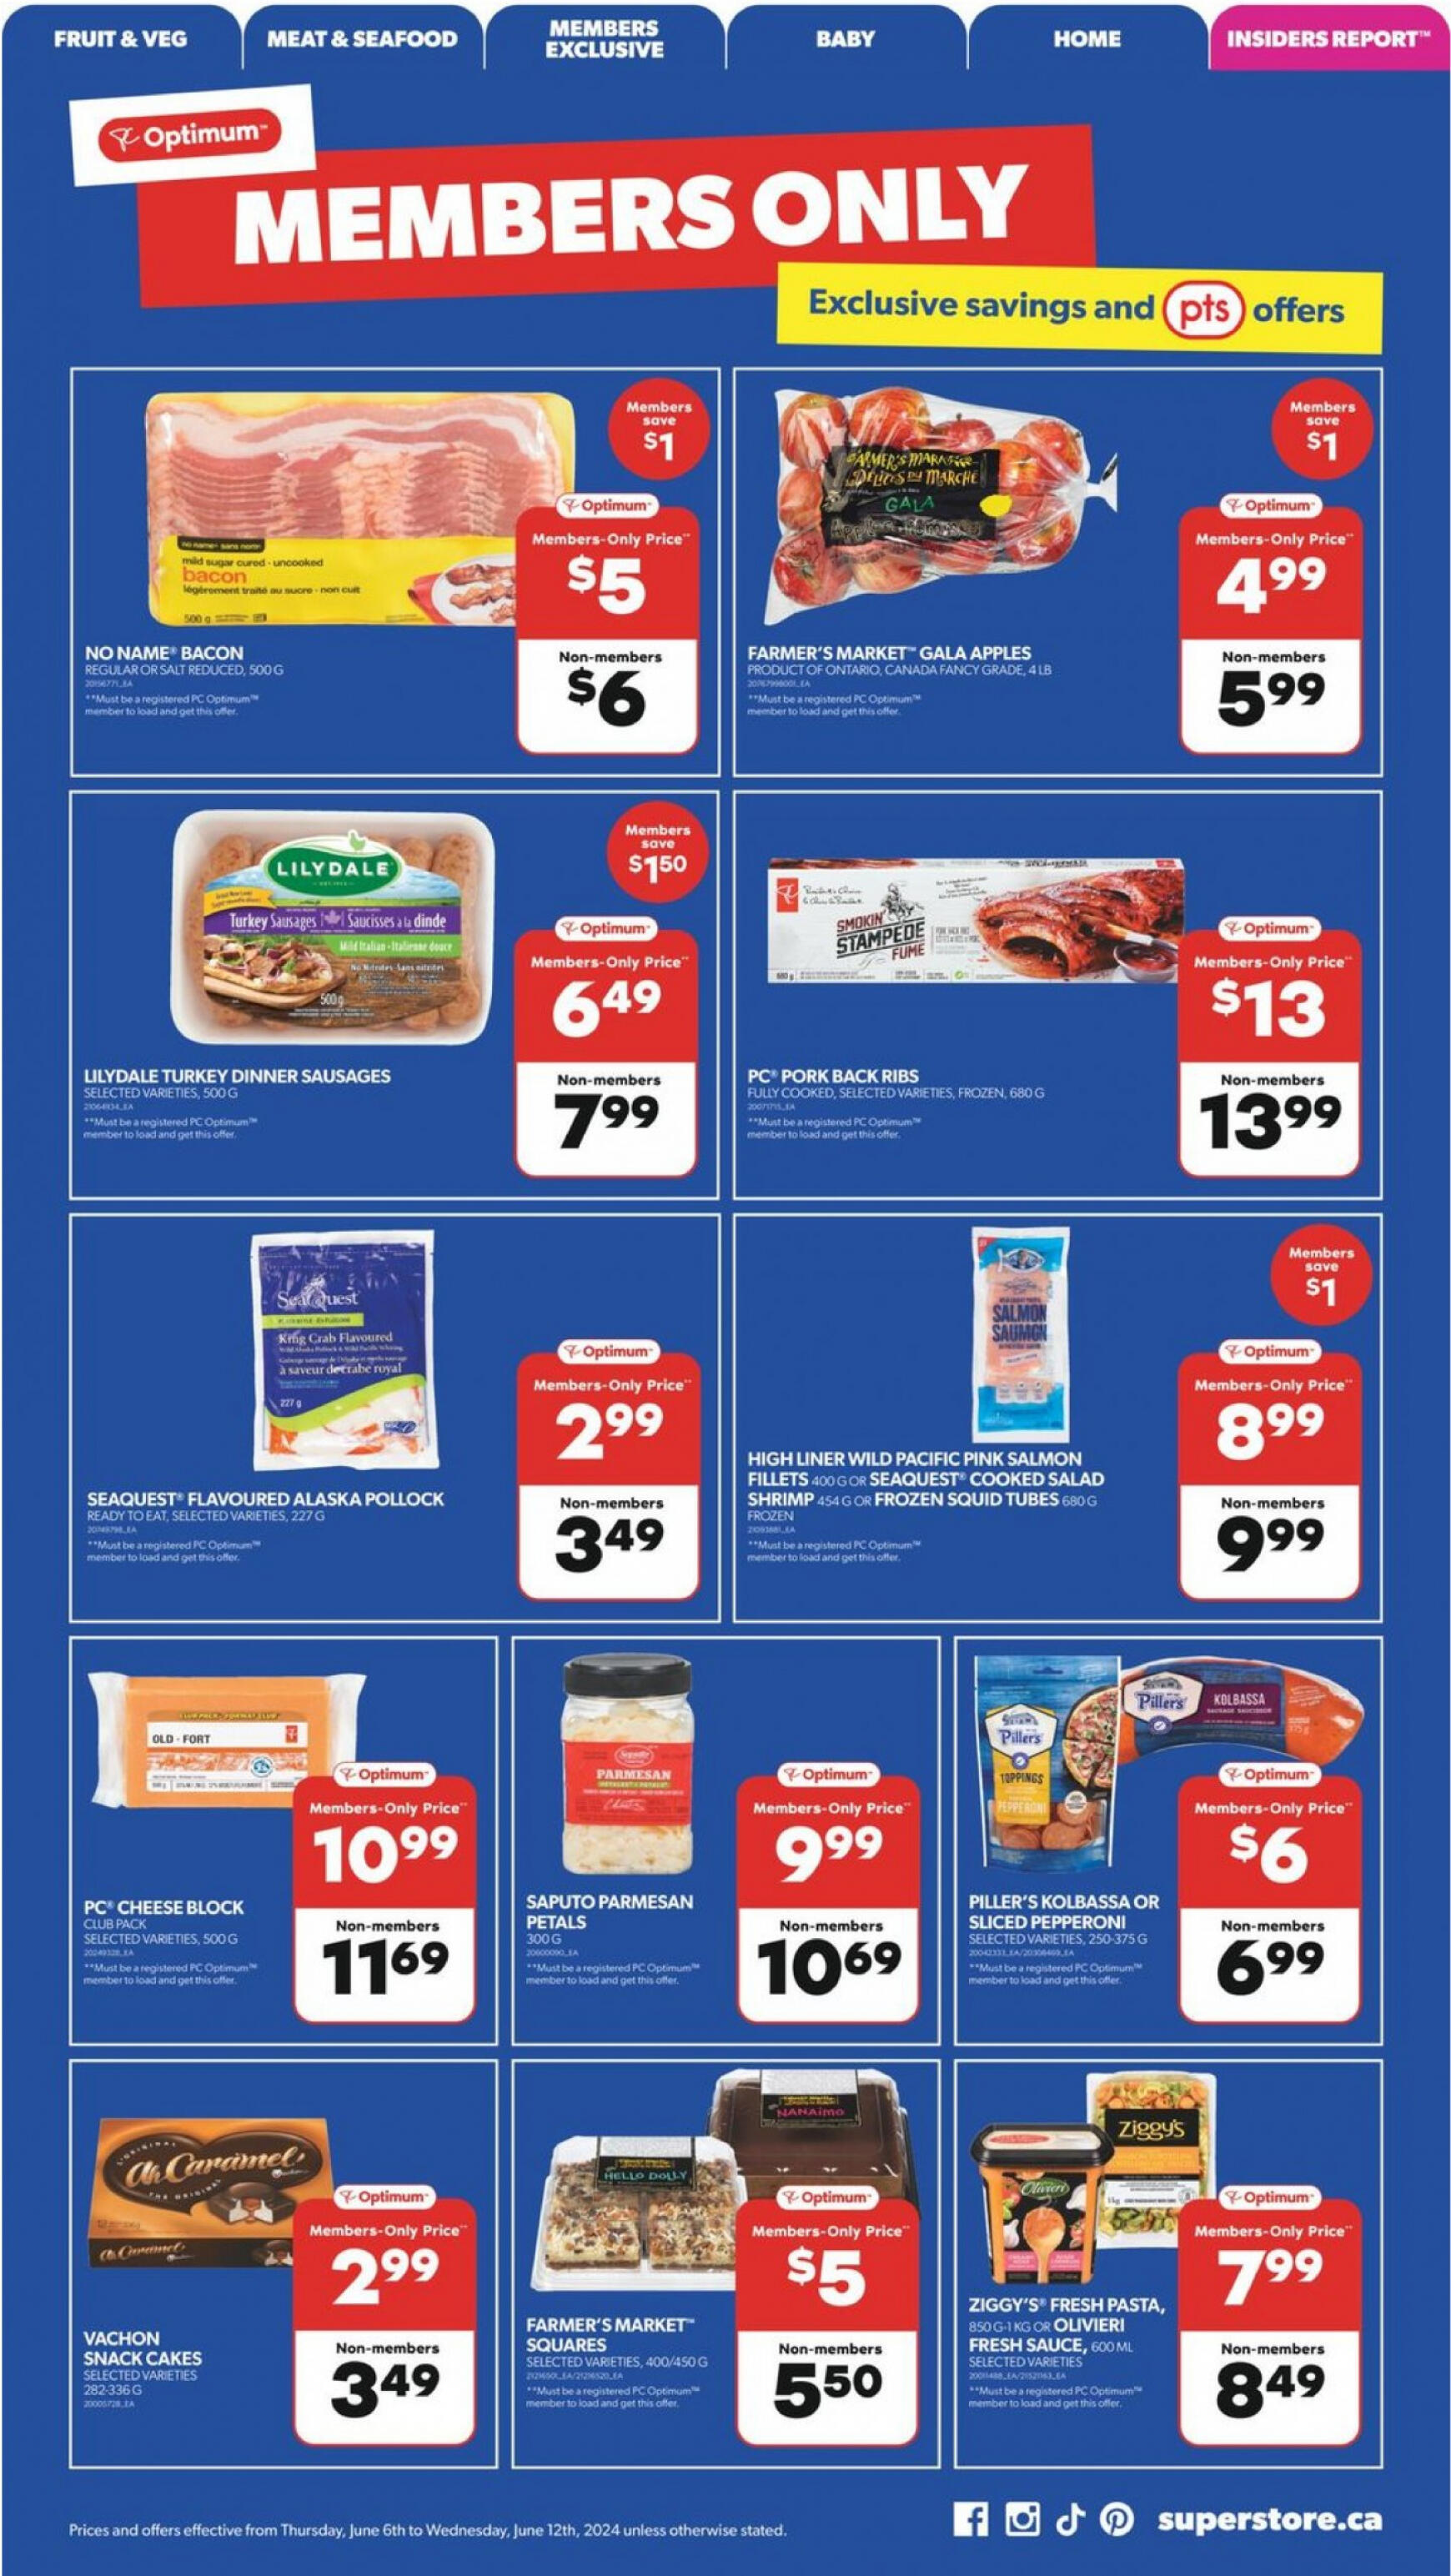 real-canadian-superstore - Real Canadian Superstore flyer current 06.06. - 12.06. - page: 6